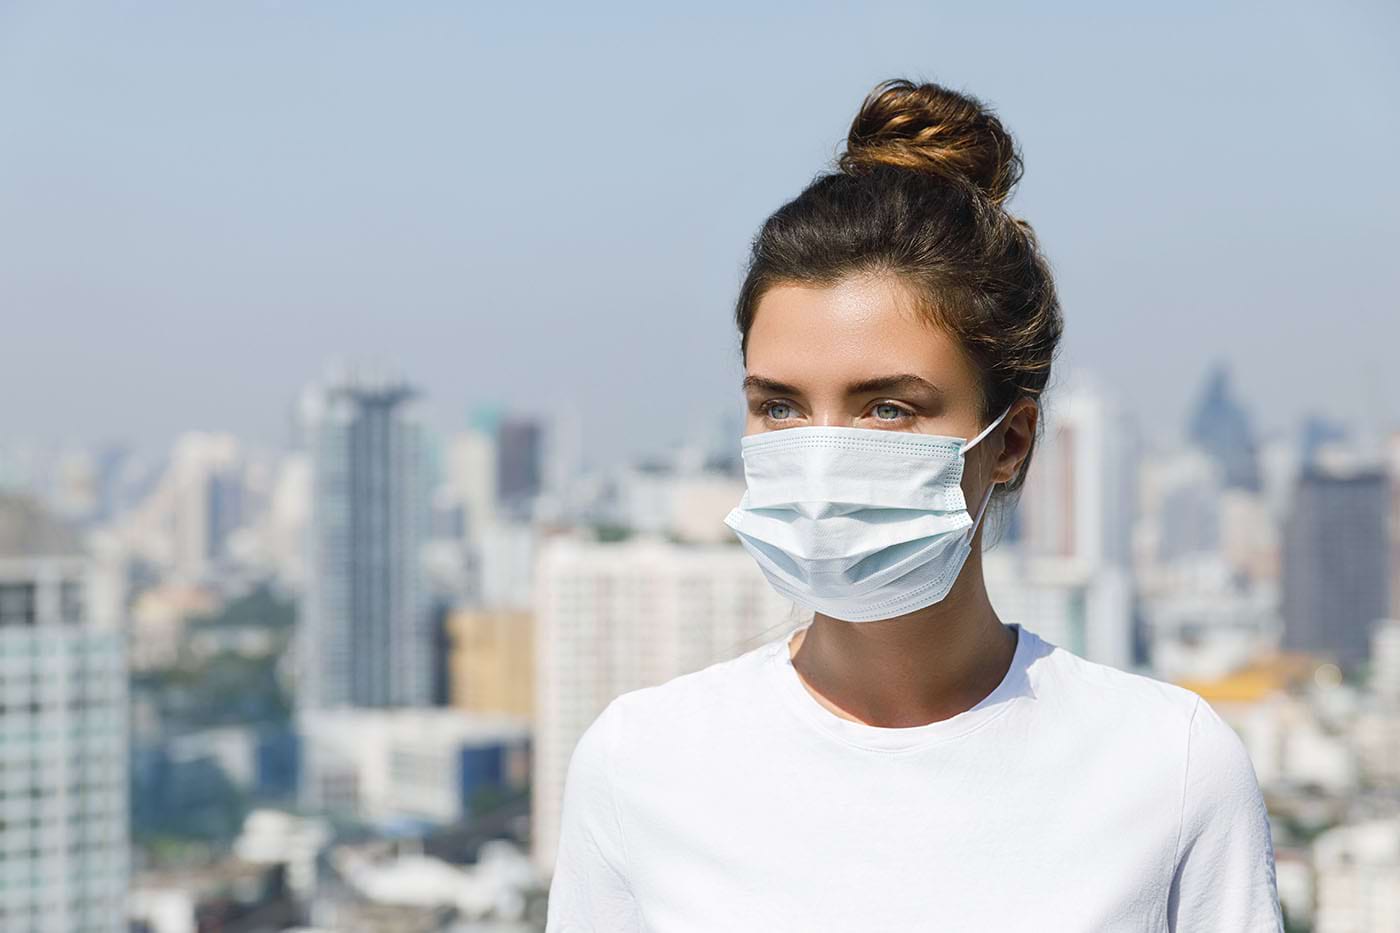 Wearing a mask or face covering if you have a lung condition